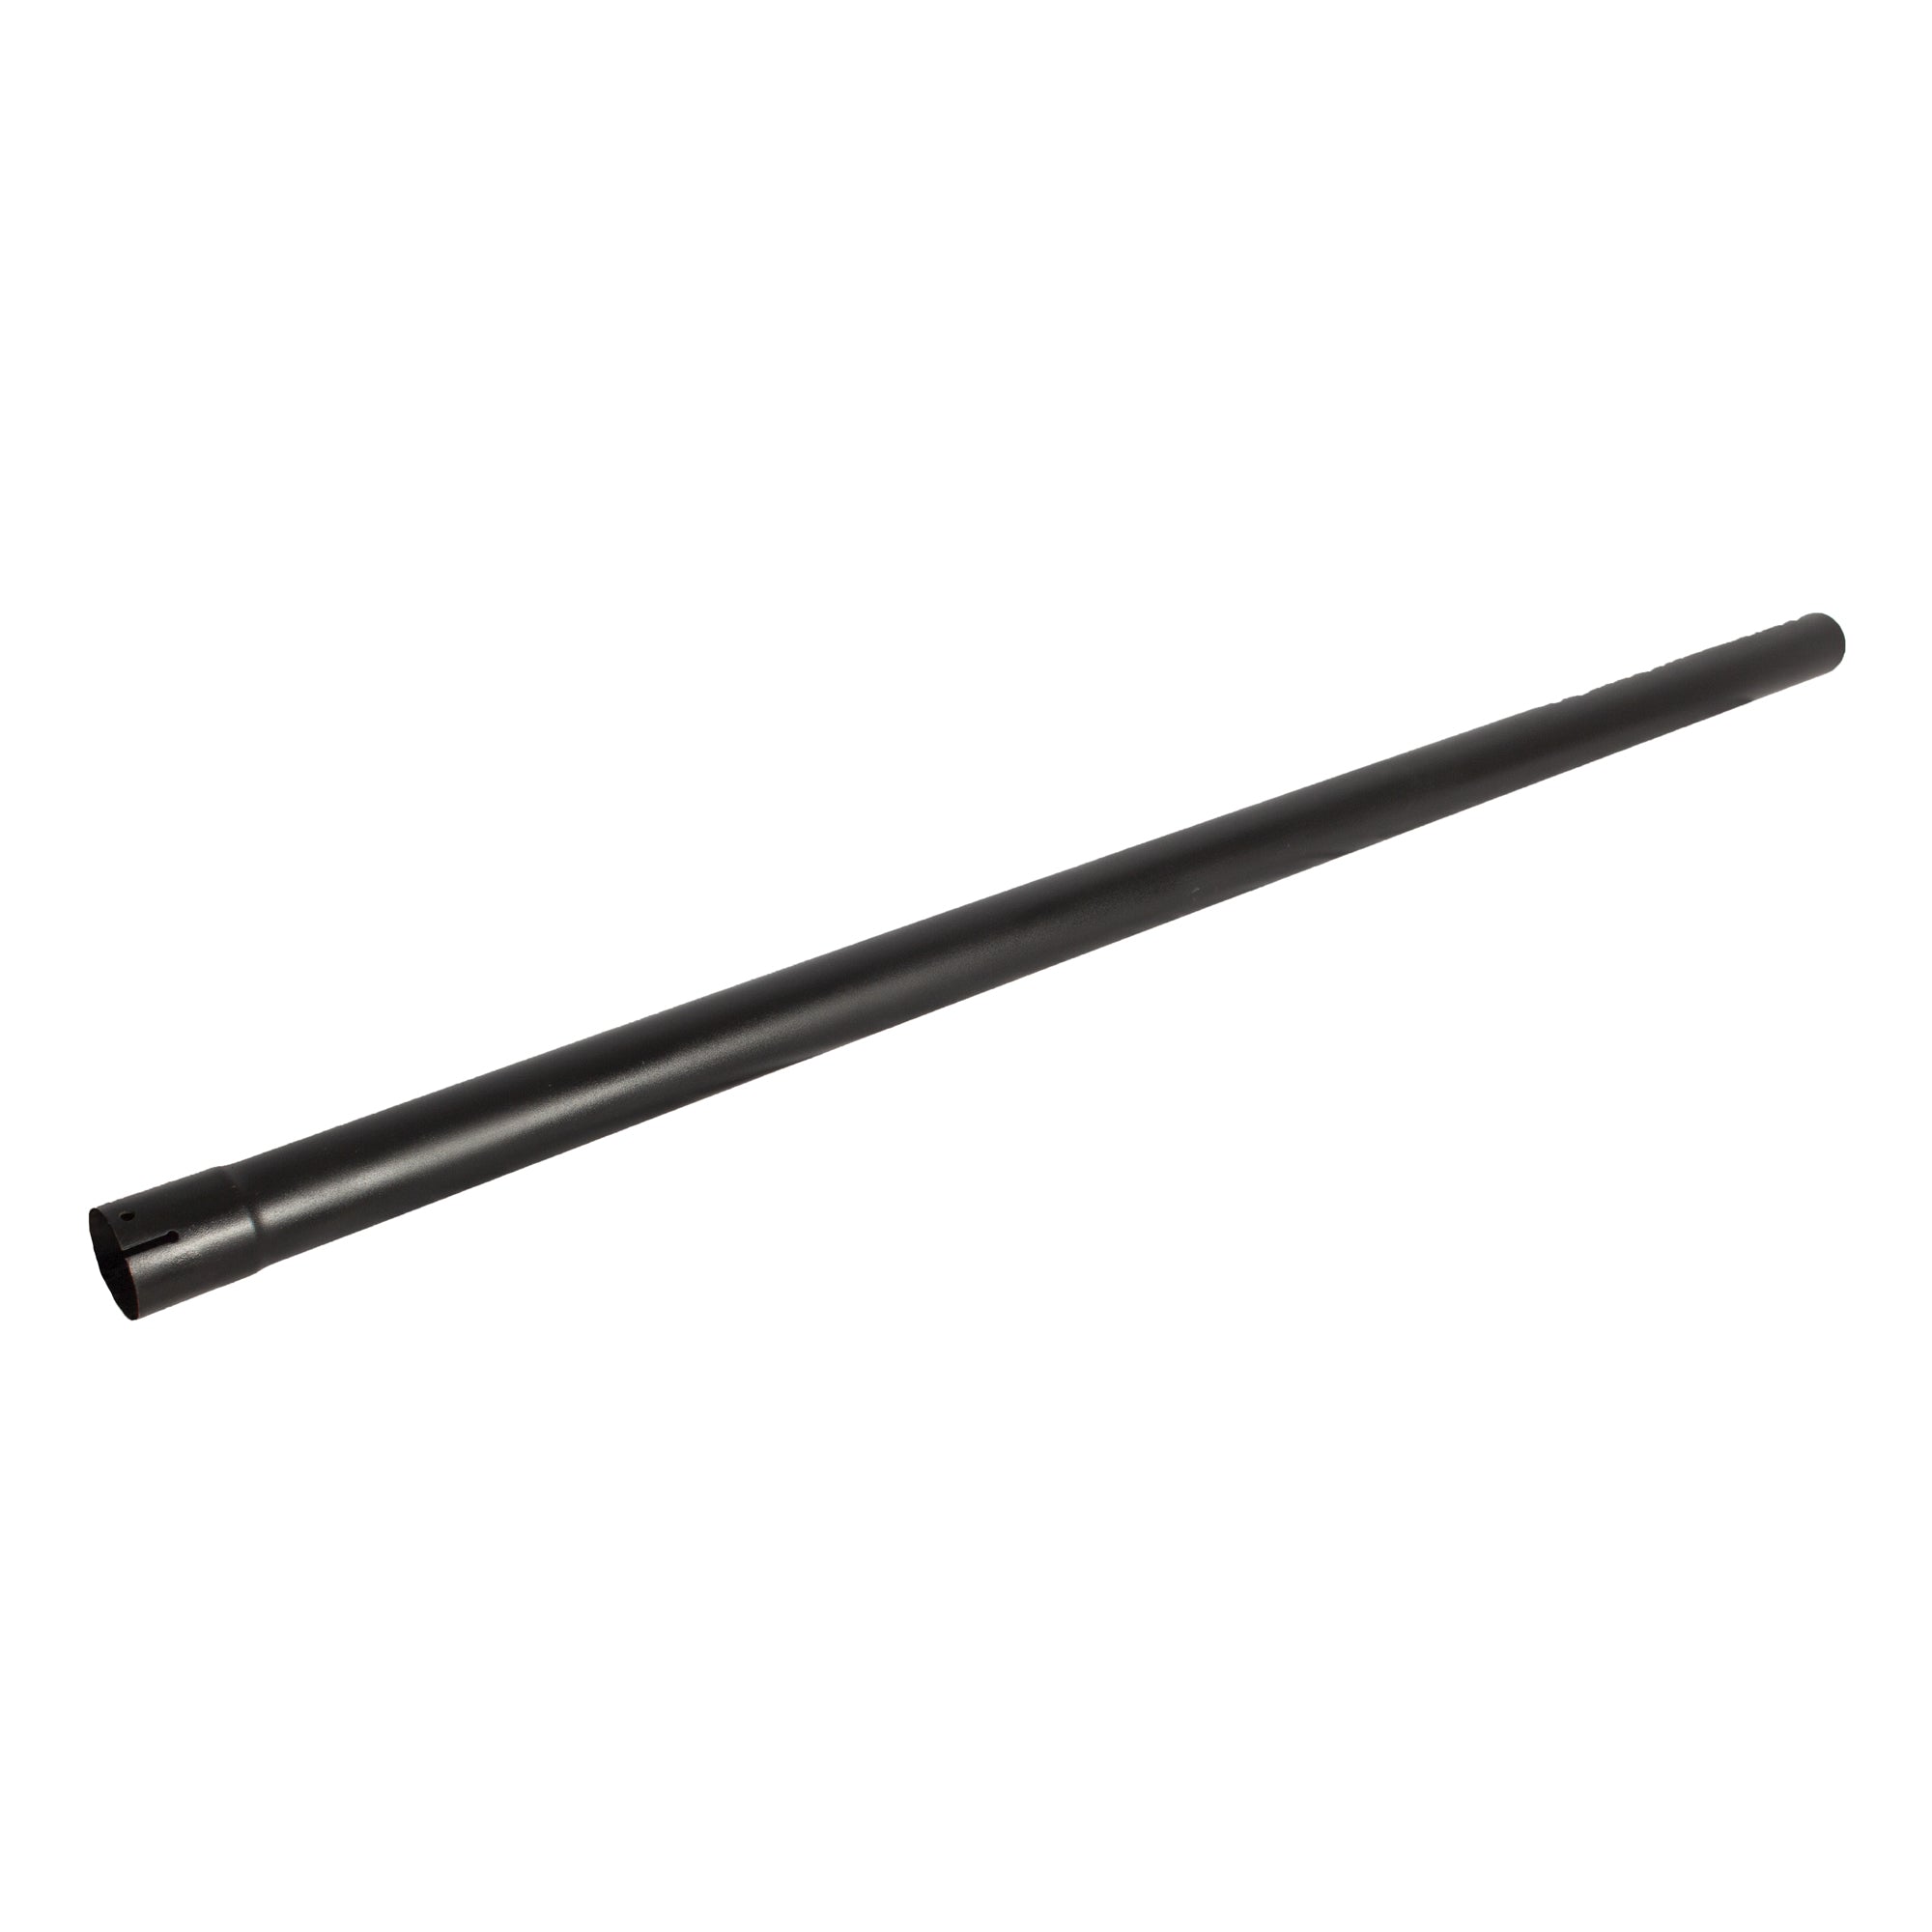 Exhaust Stack Pipe Replacement for UNIVERSAL- 21"x 59,06" Straight Black